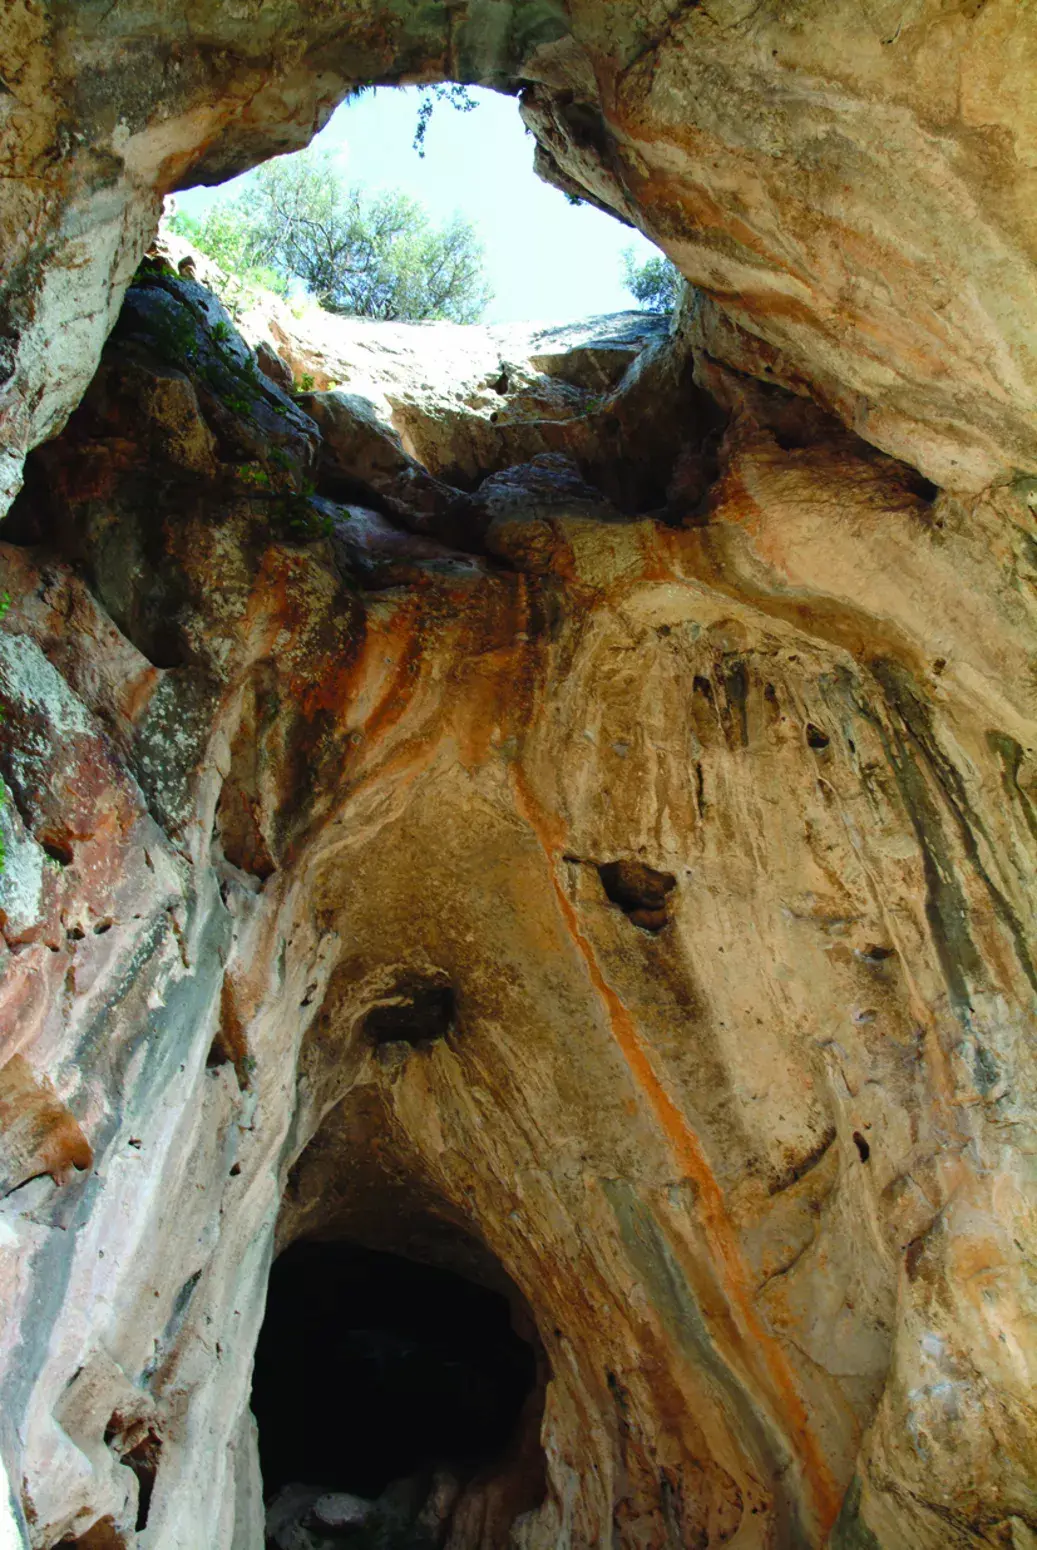 The Cave of Palomares lies from prehistoric times